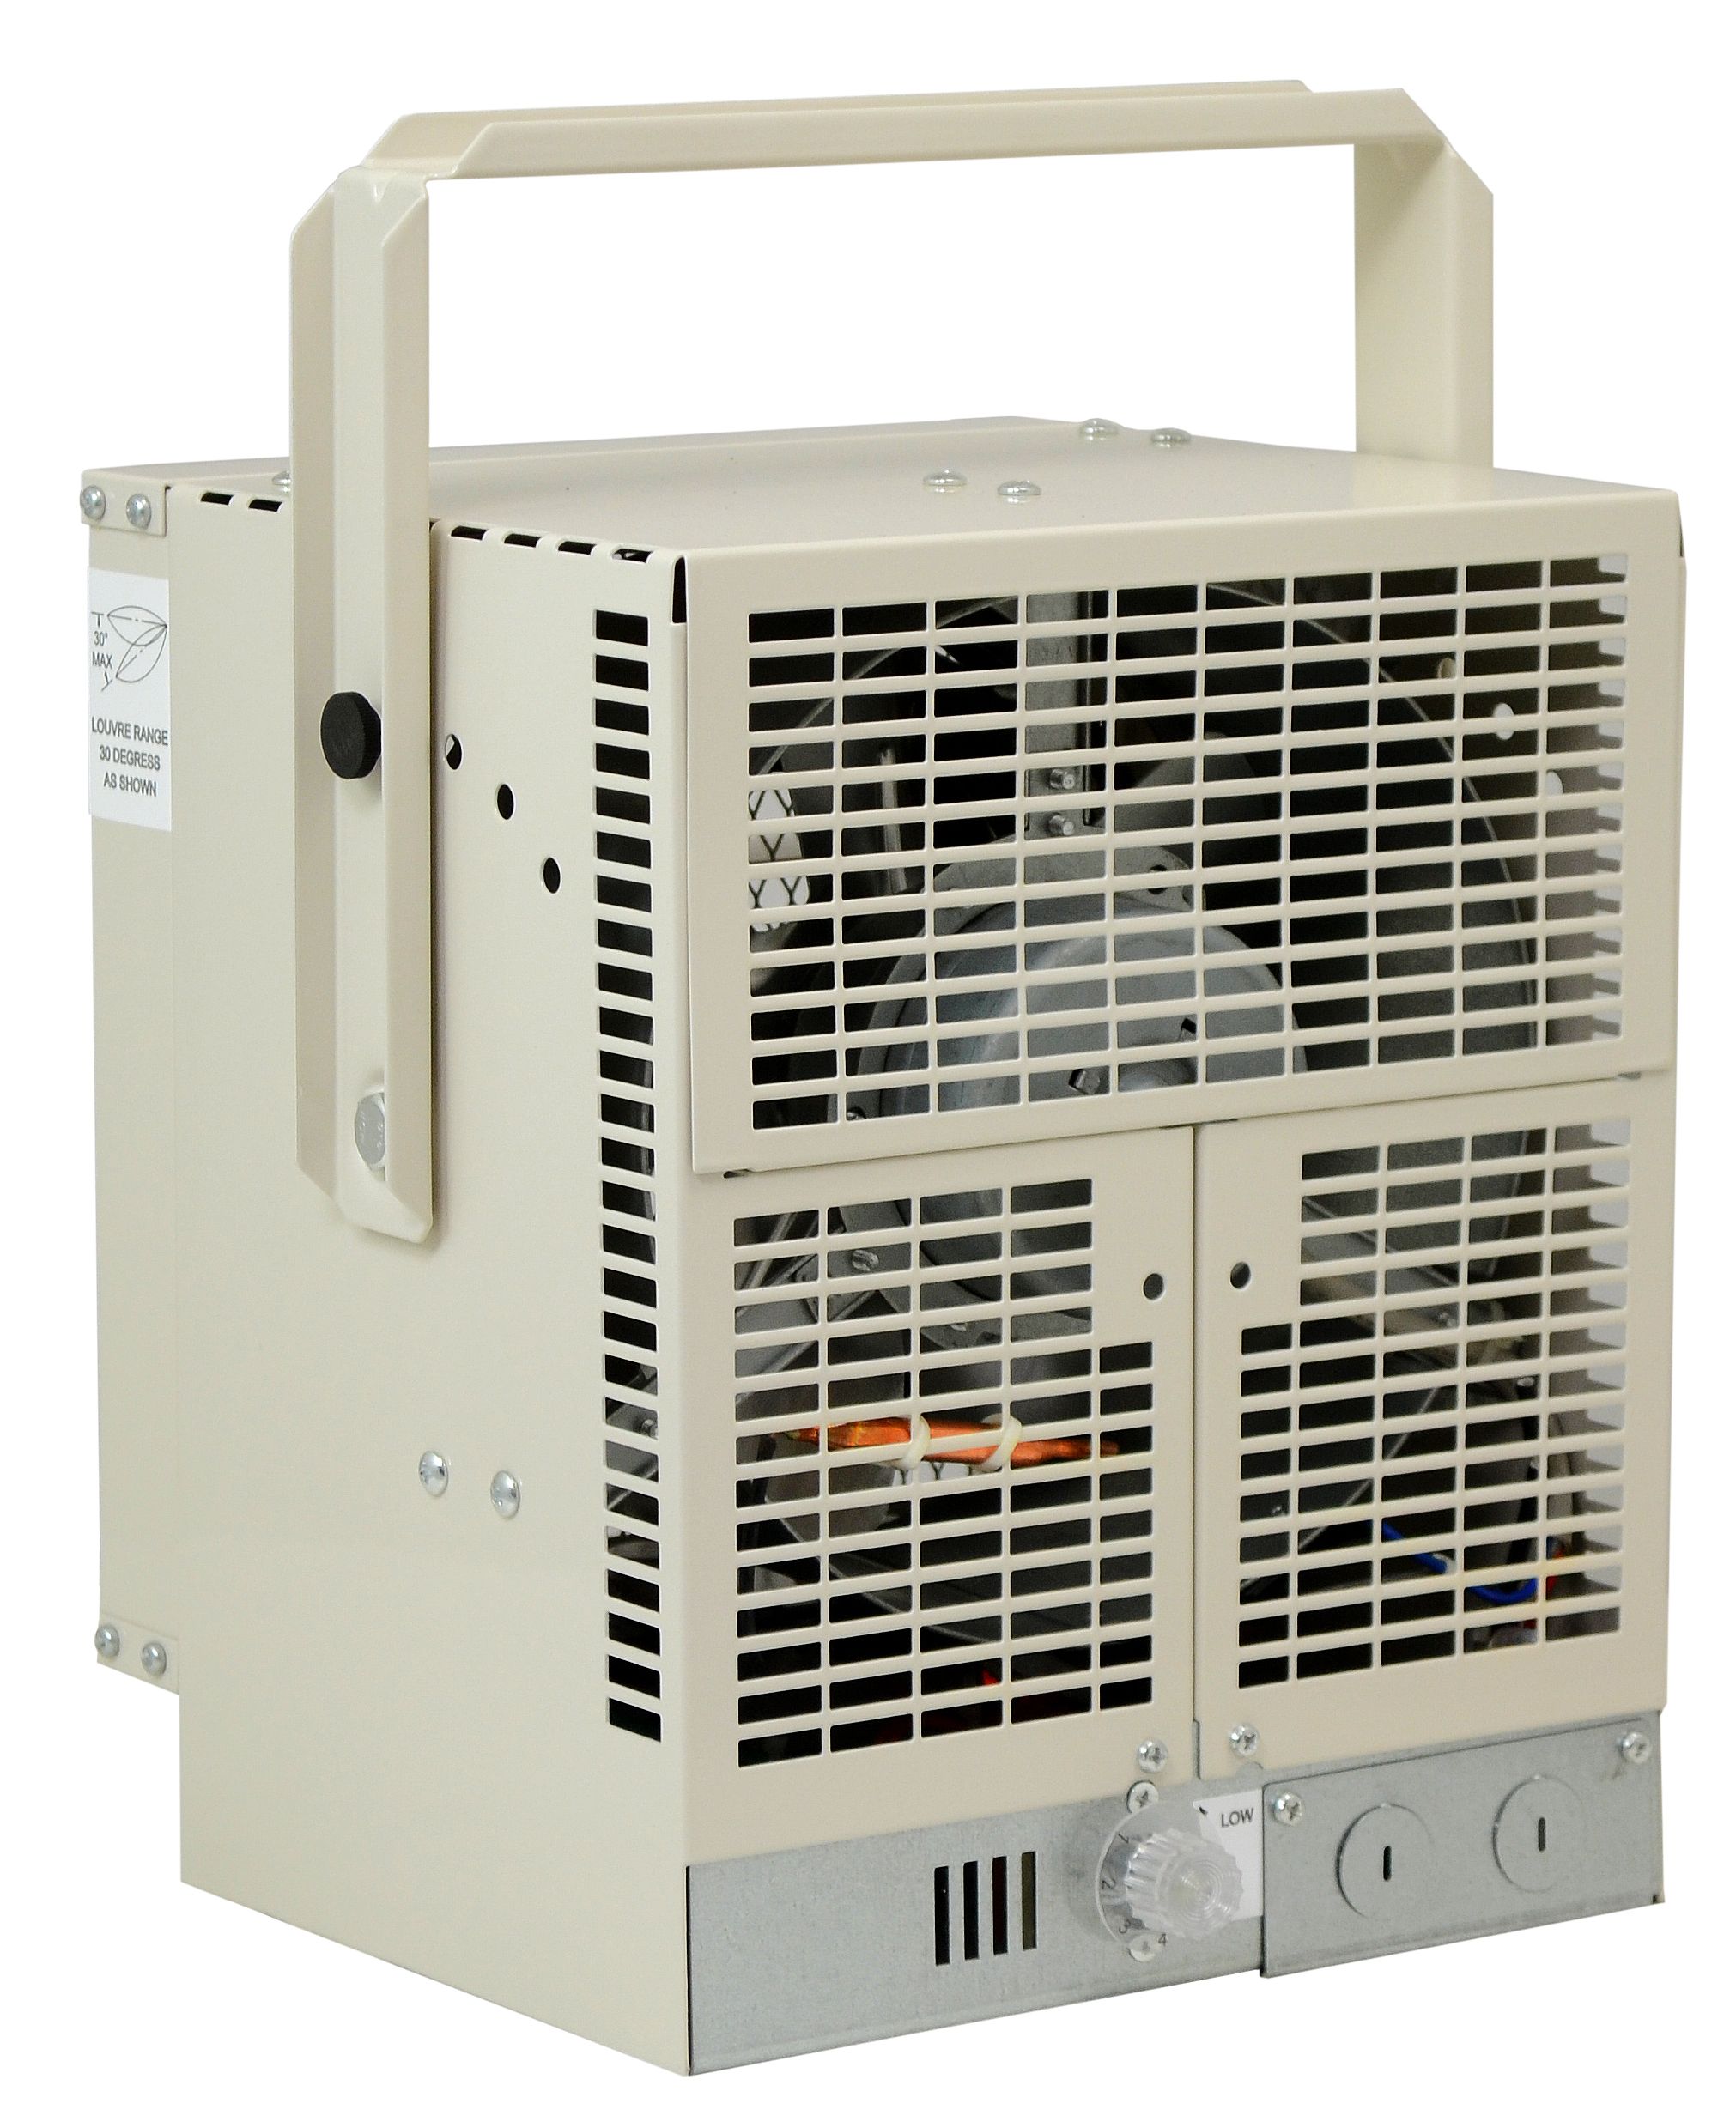  Electric Garage Heater   The Most Trusted Garage Heater Available